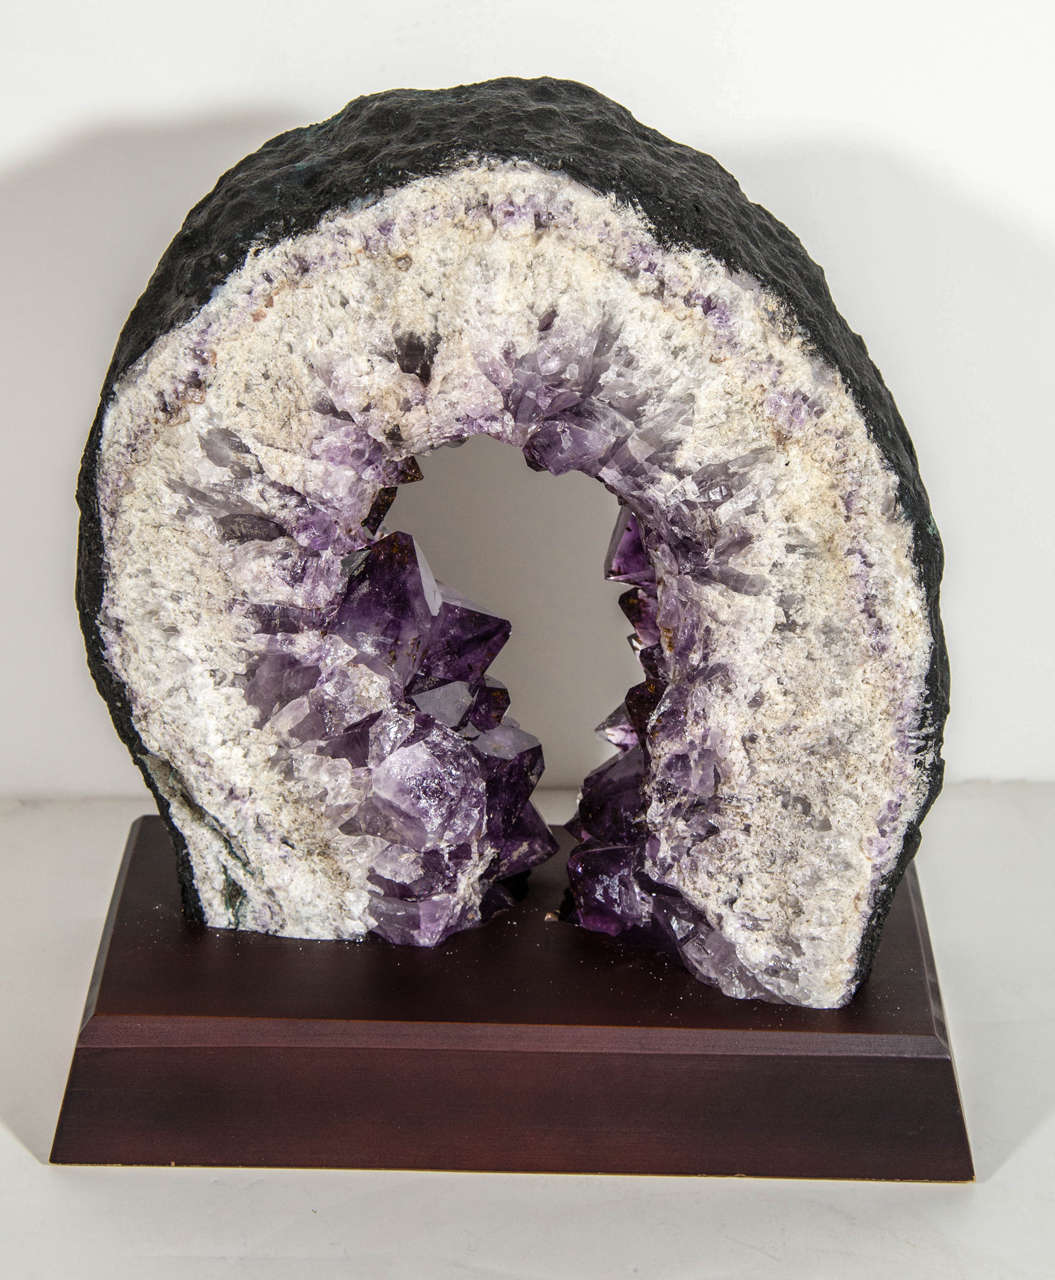 Outstanding geode speciman and sculpture with unique horse shoe form. The geode is comprised of quartz crystal and amethyst chunks in gradient tones of whites to deep purple.  It features a hand cut and polished front with rough edges, and has a